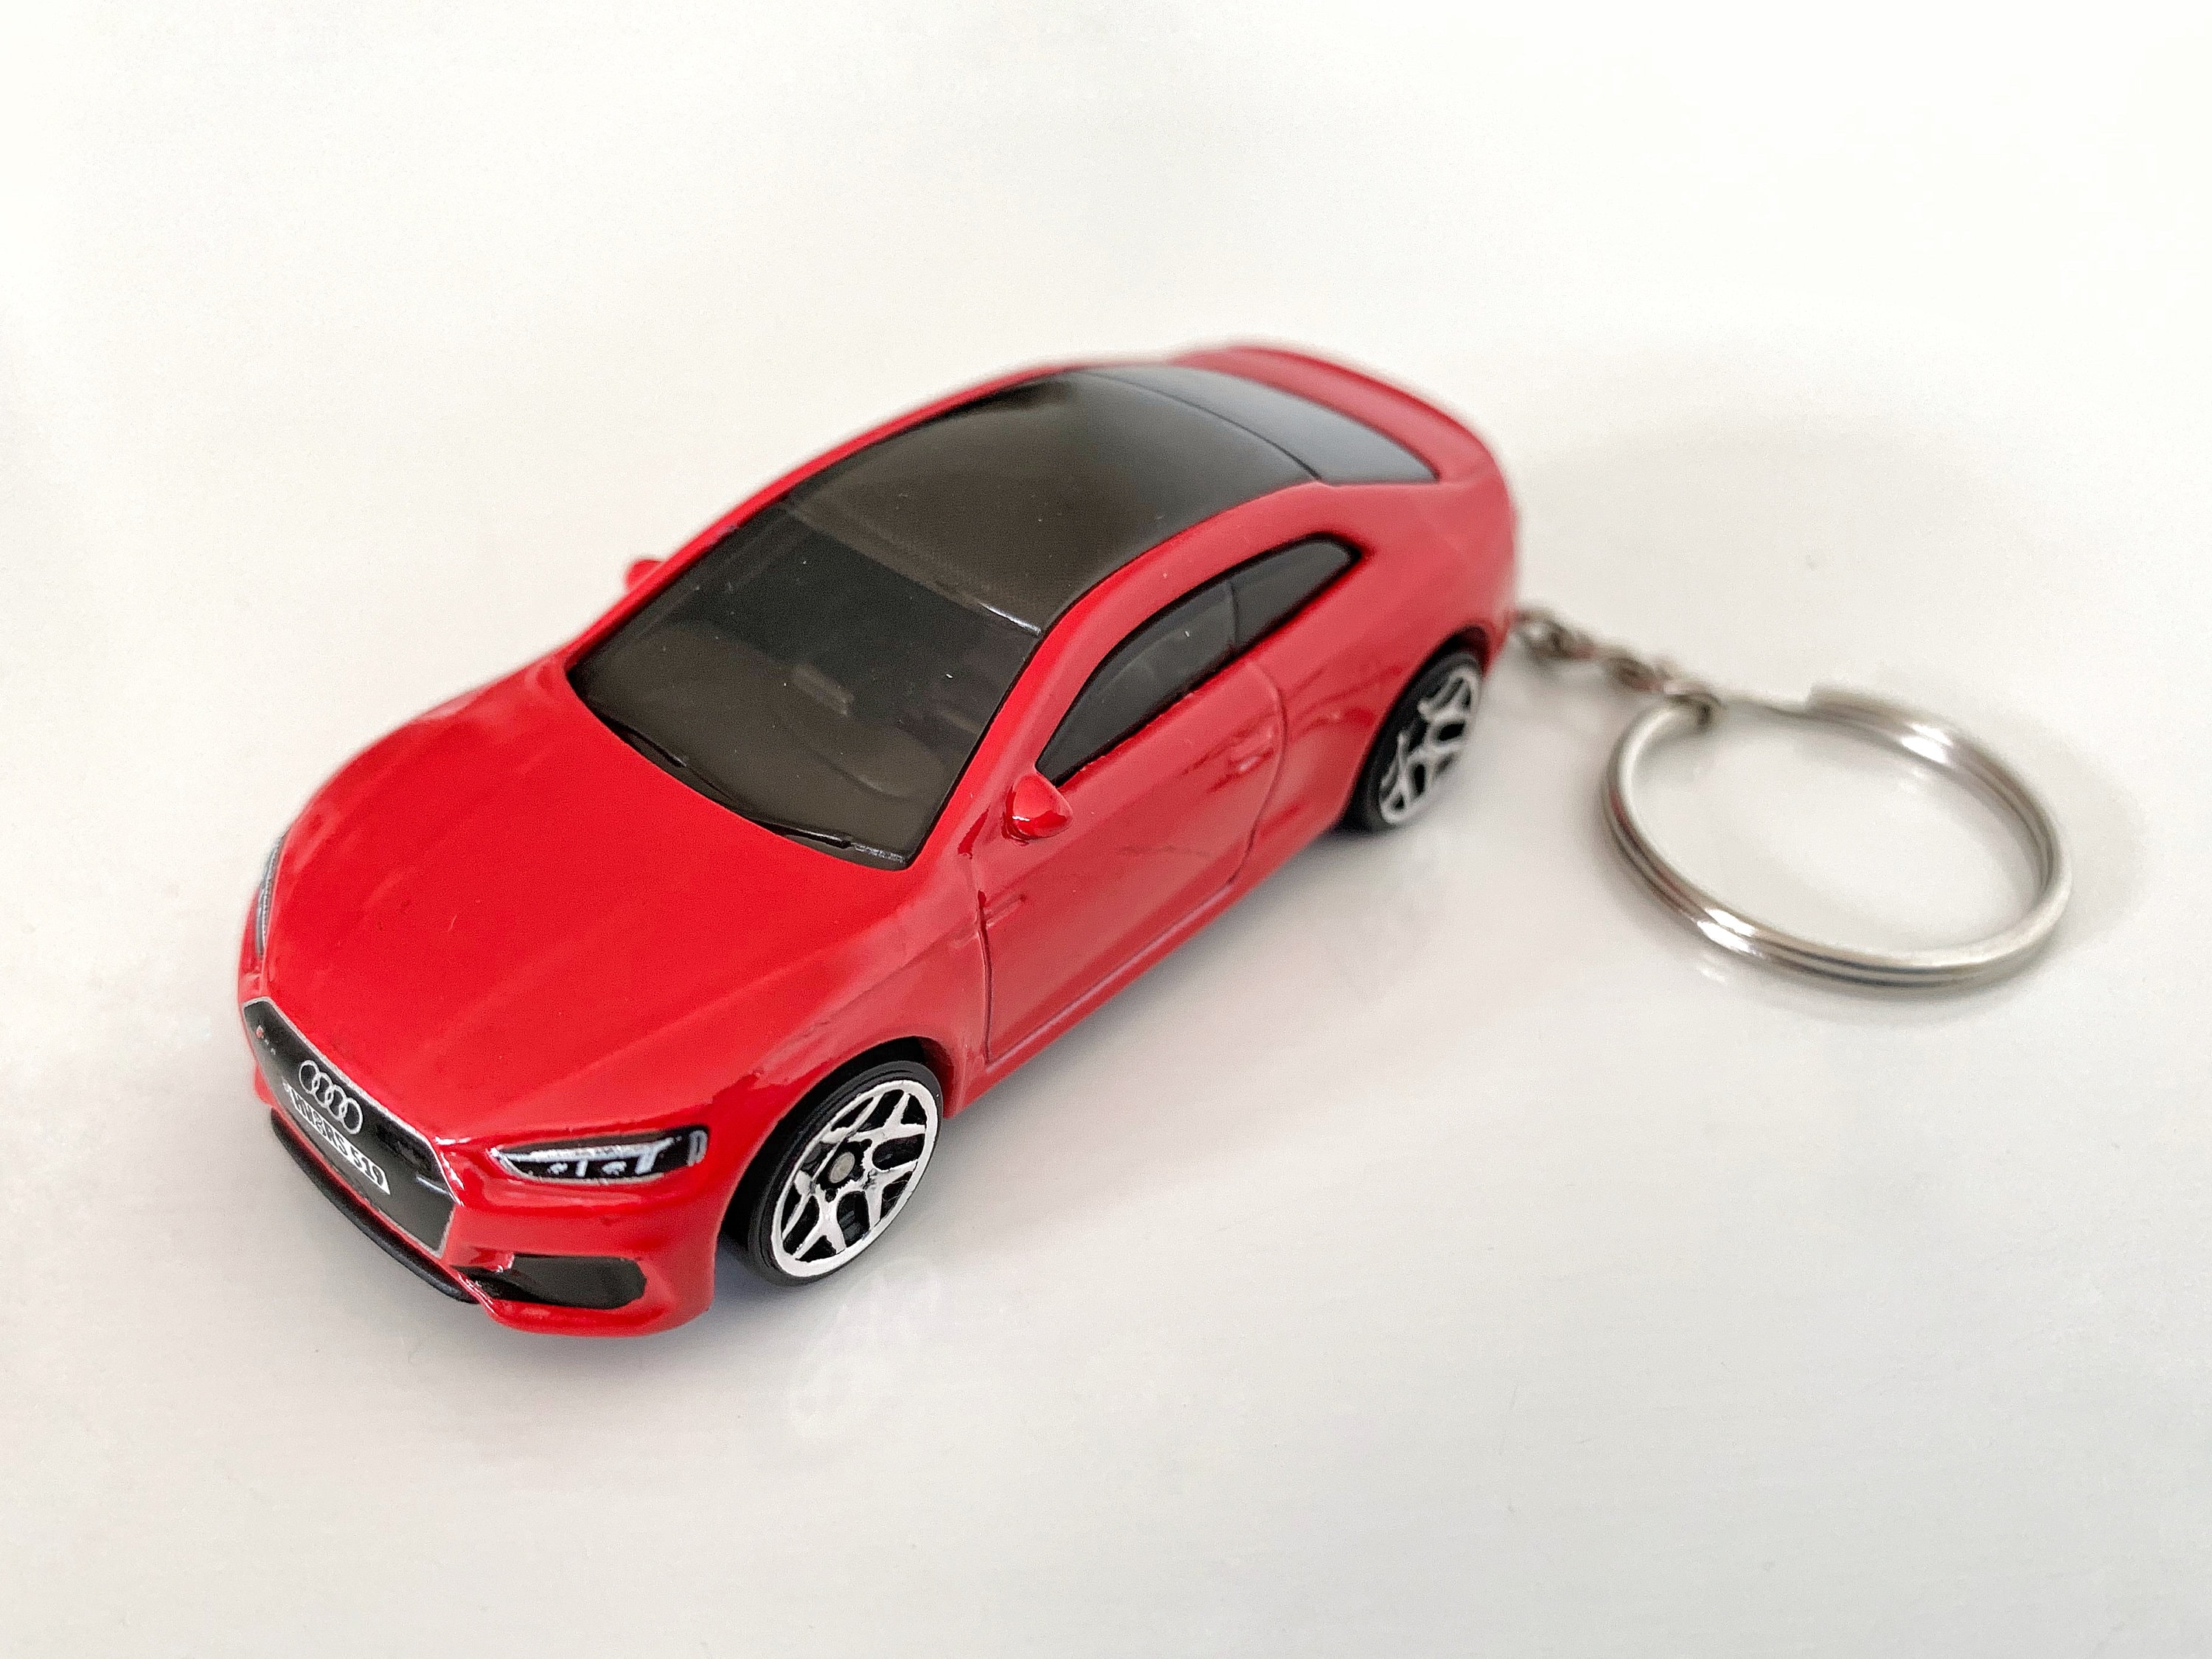 Hot wheels audi rs 5  coupe keyring diecast car Keychain 